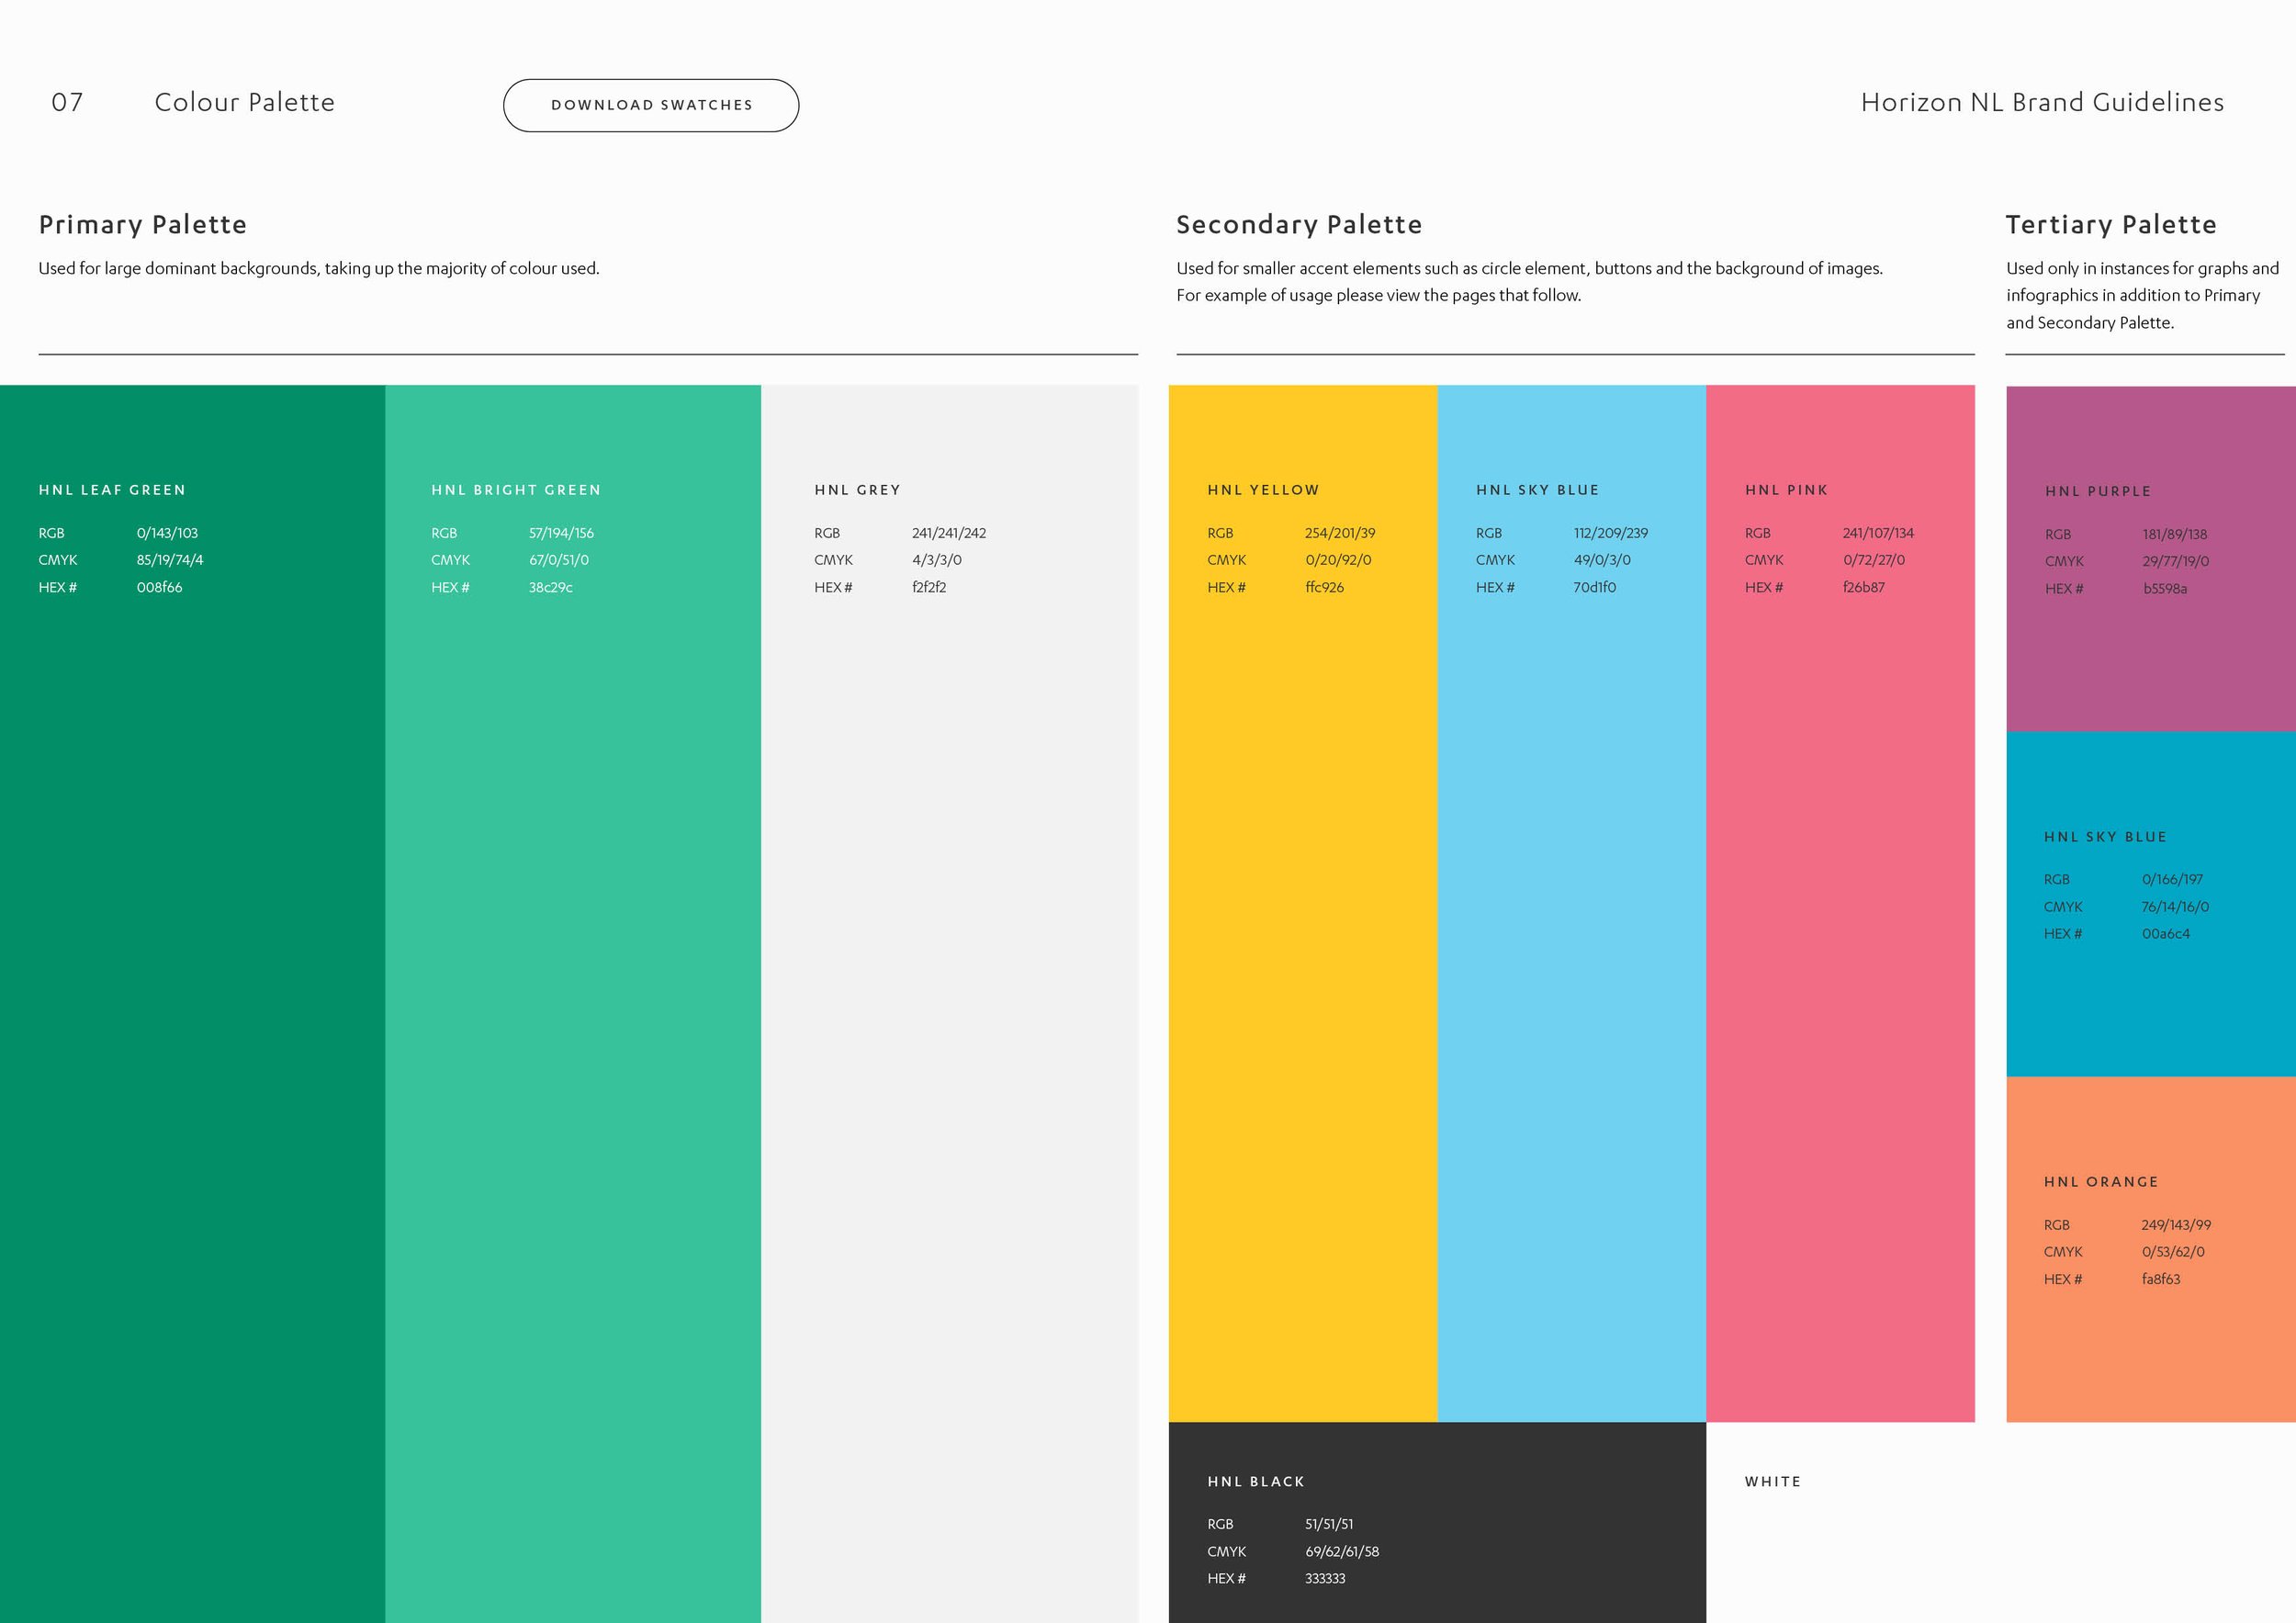 Horizon NL brand guidelines colour page